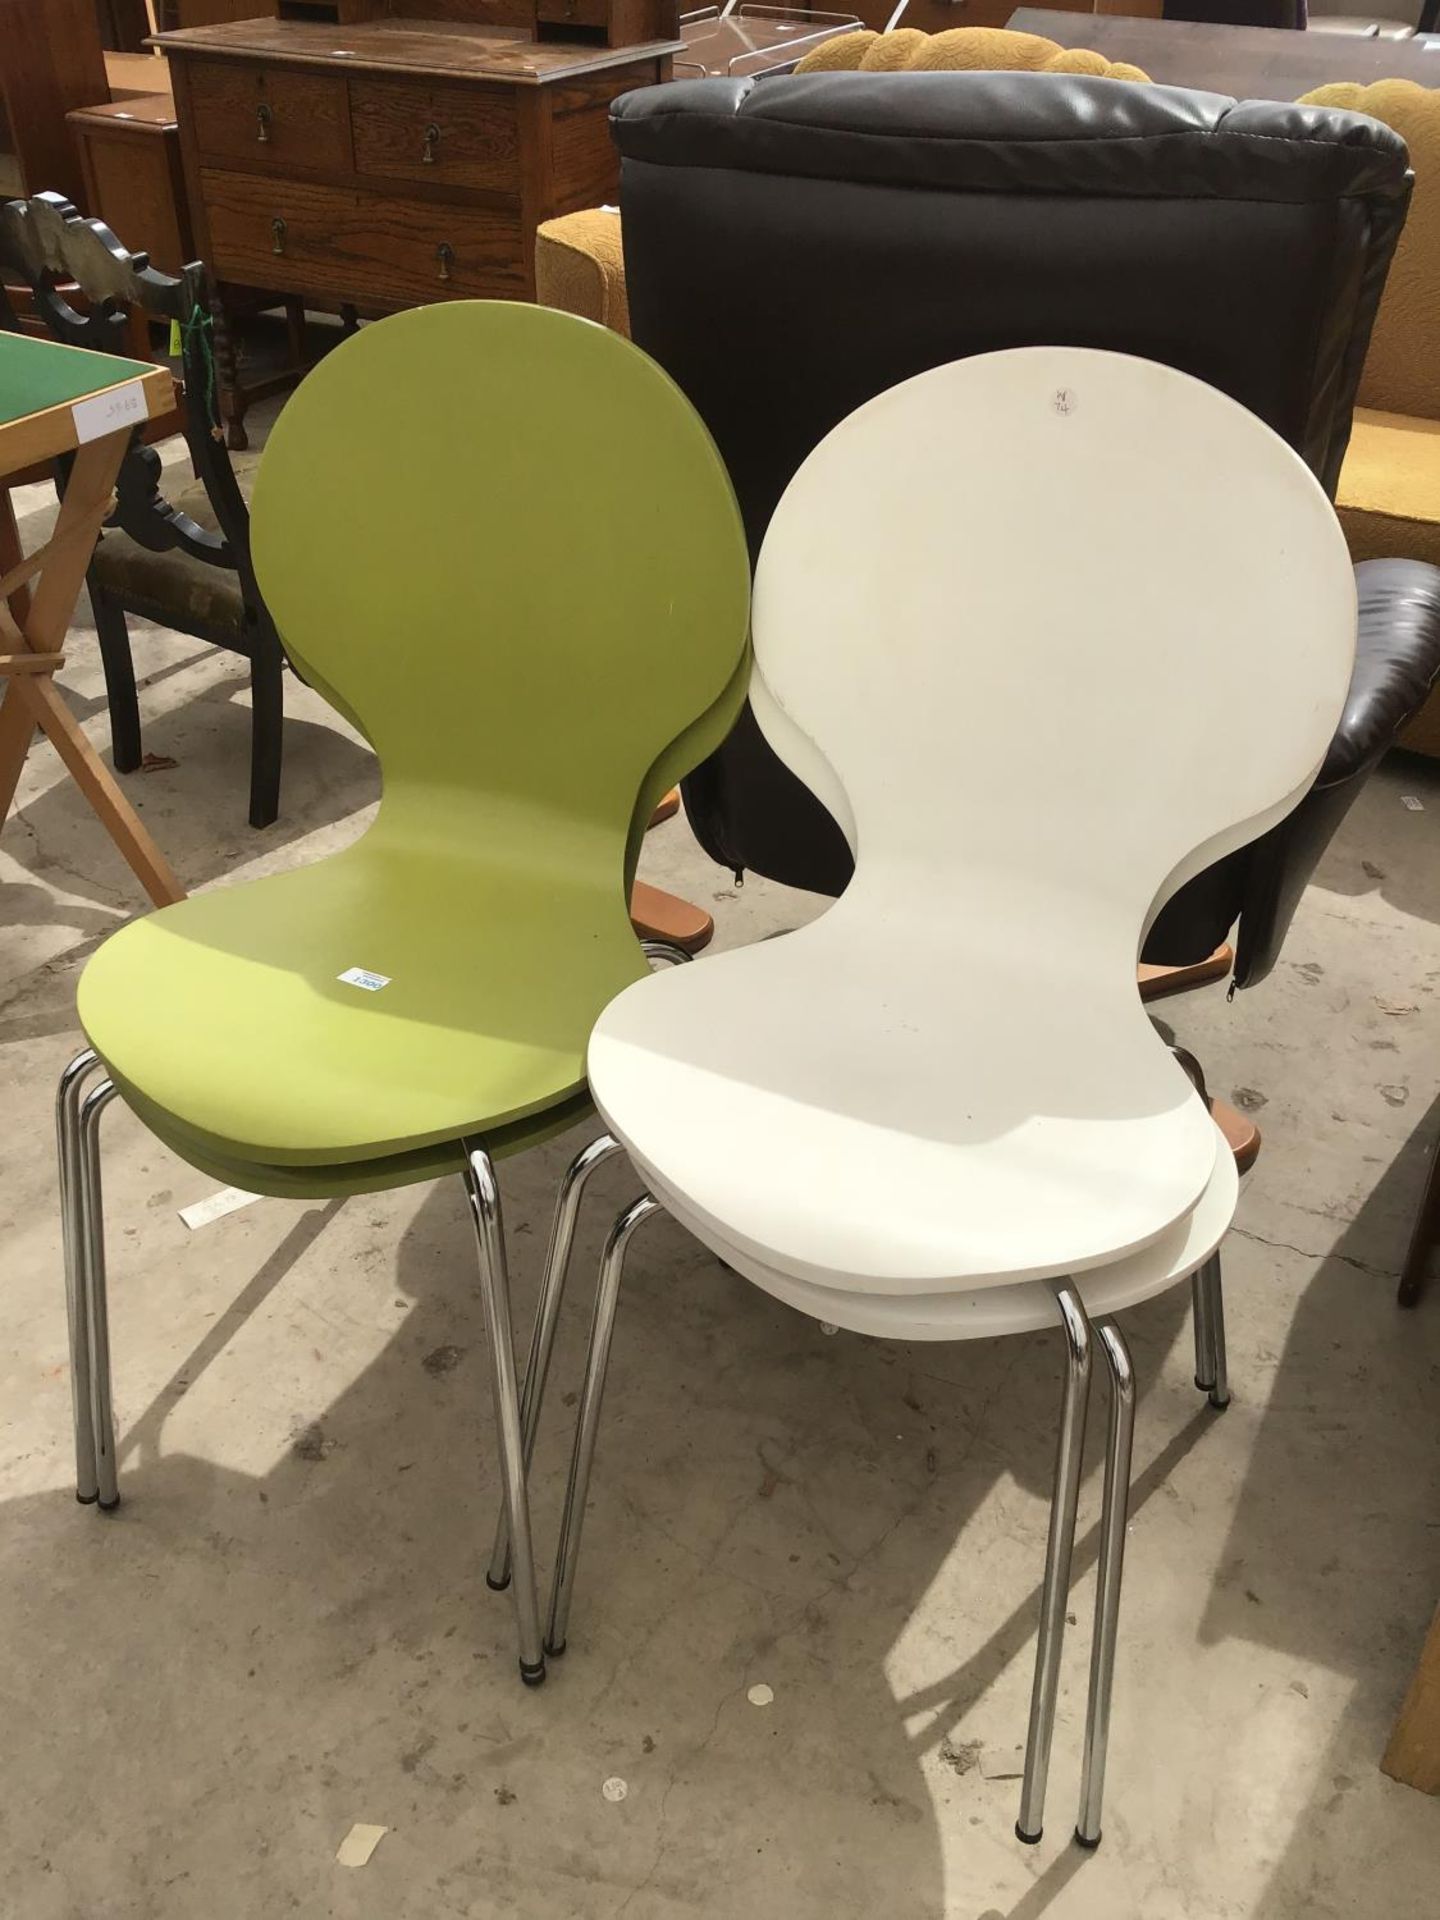 FOUR MODERN PLASTIC DINING CHAIRS - TWO GRREN, TWO WHITE